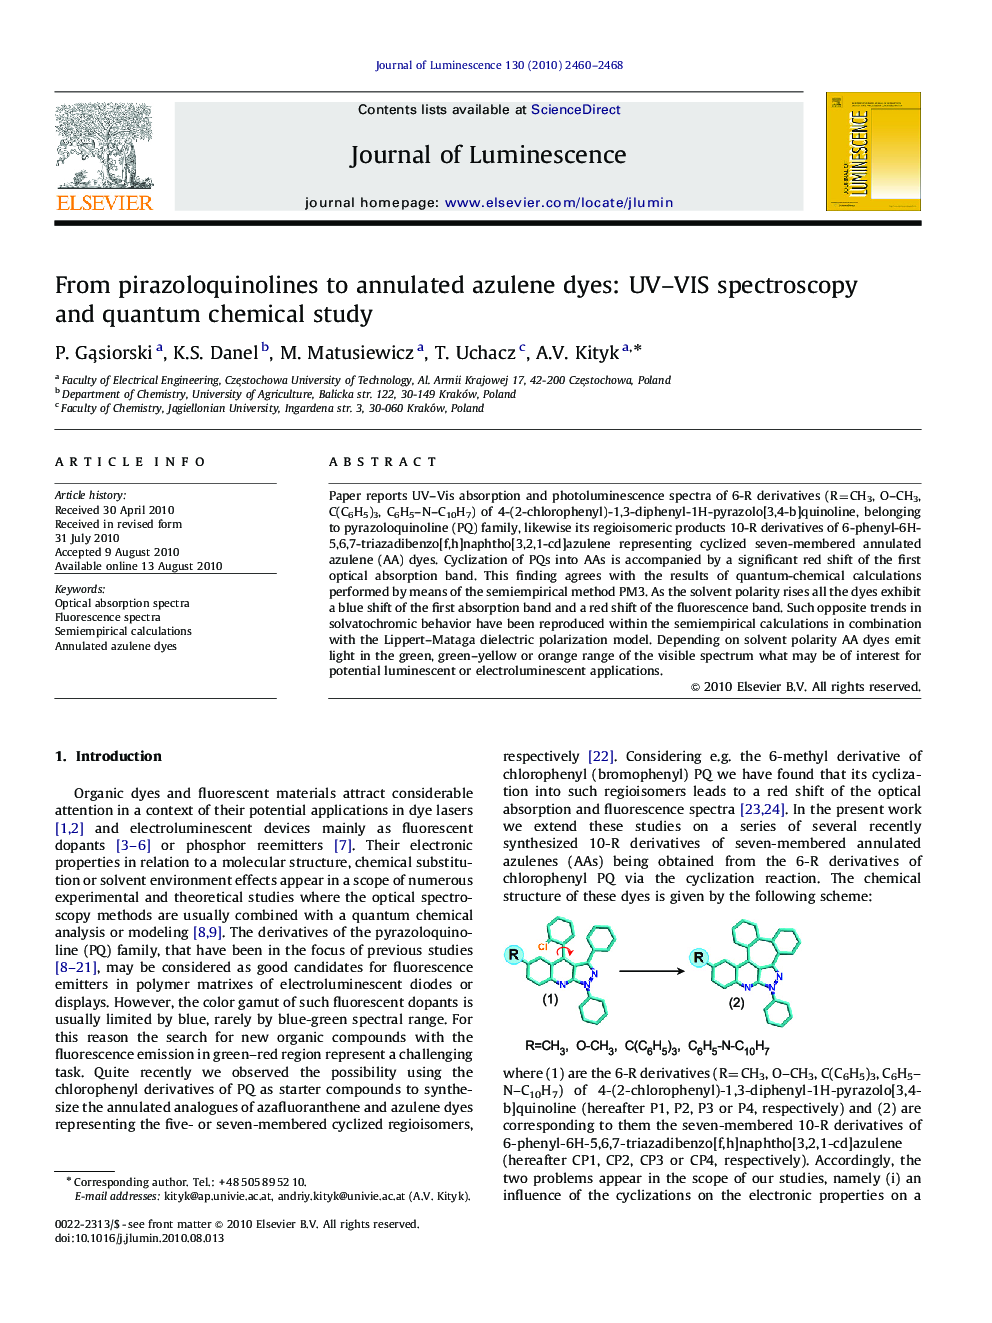 From pirazoloquinolines to annulated azulene dyes: UV-VIS spectroscopy and quantum chemical study